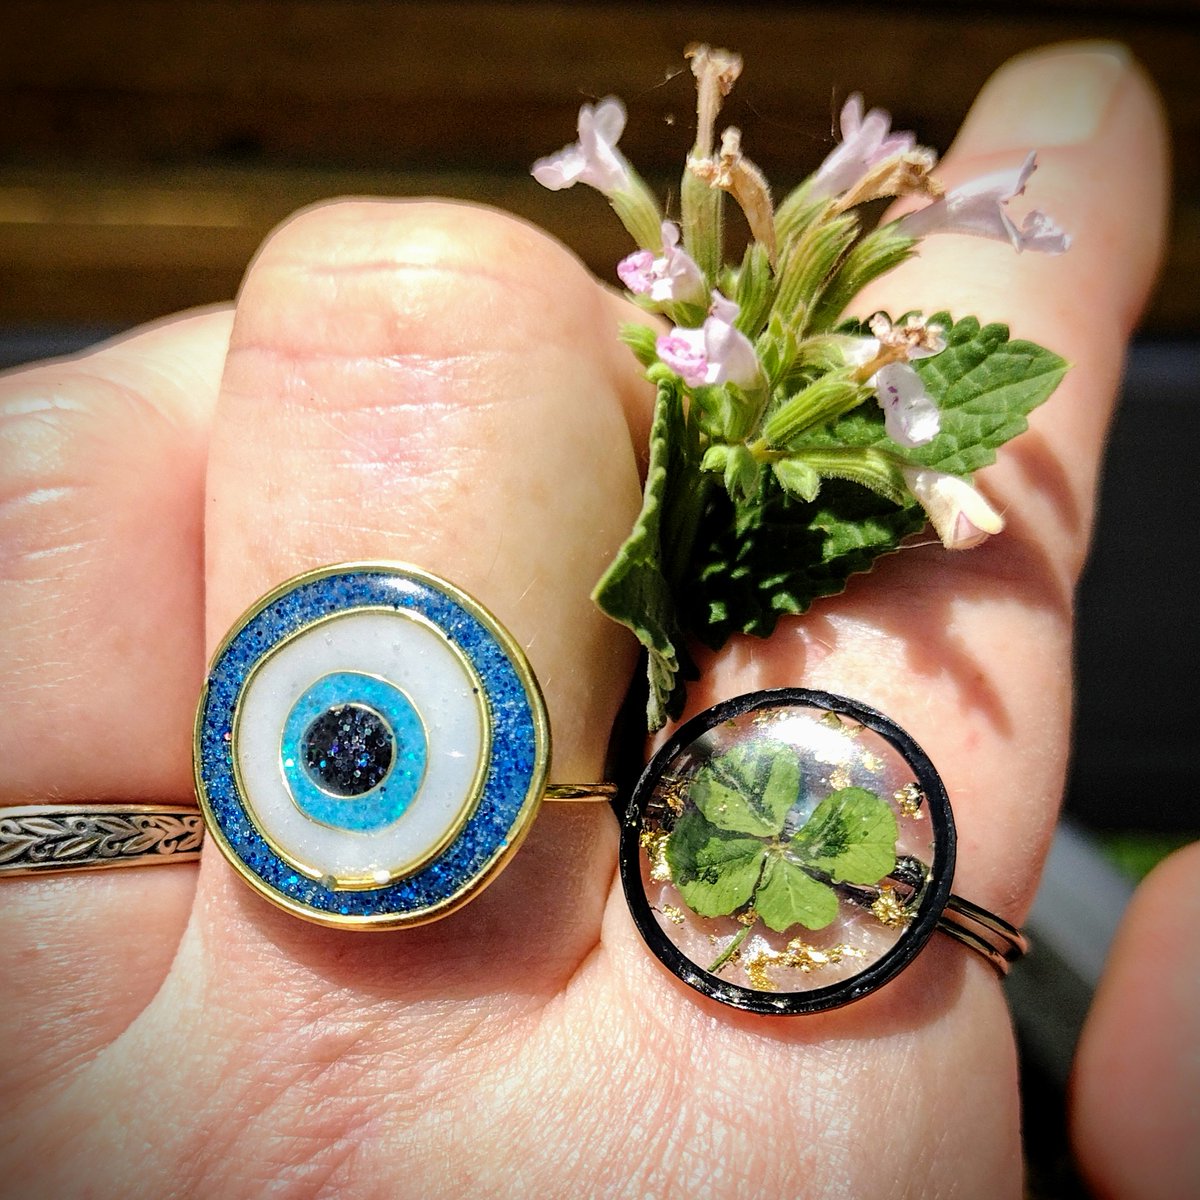 Evil Eye Talisman and a itsy bitsy four leaf clover rings.
Trying to get our oldest to find me some more baby clovers because I can't find one.
~✌️❤️🙂🖖~ Mindy
#clover
#evileyetalisman 
#ring 
#rings
#luck
#protection 
#resin
#resinring
#resinartwork 
#resinart